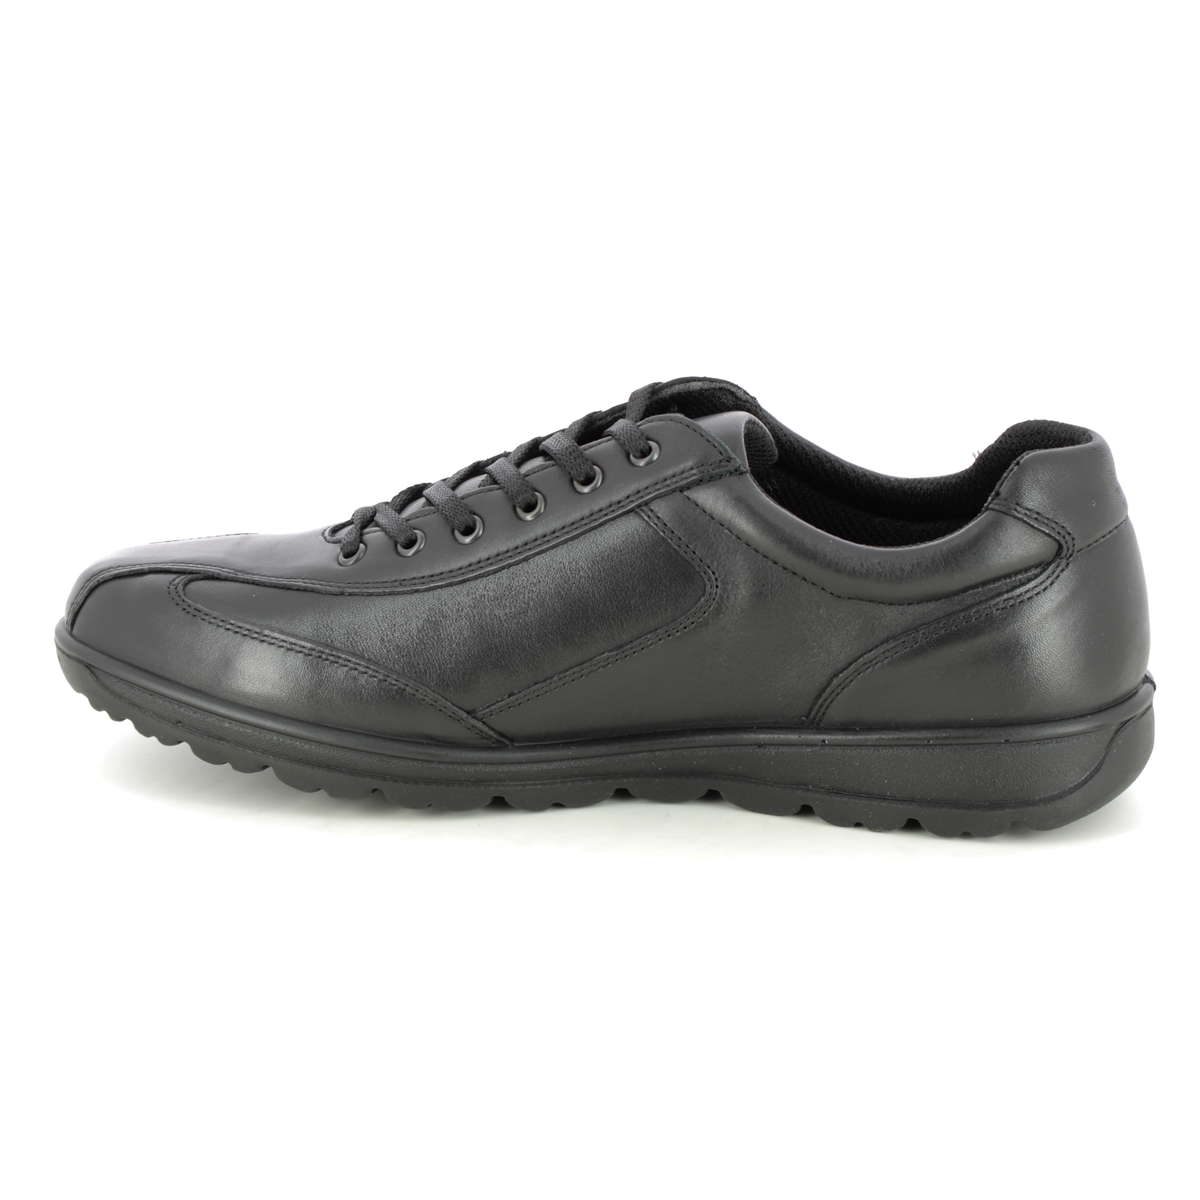 IMAC Relay Lace Black leather Mens comfort shoes 1780-2290011